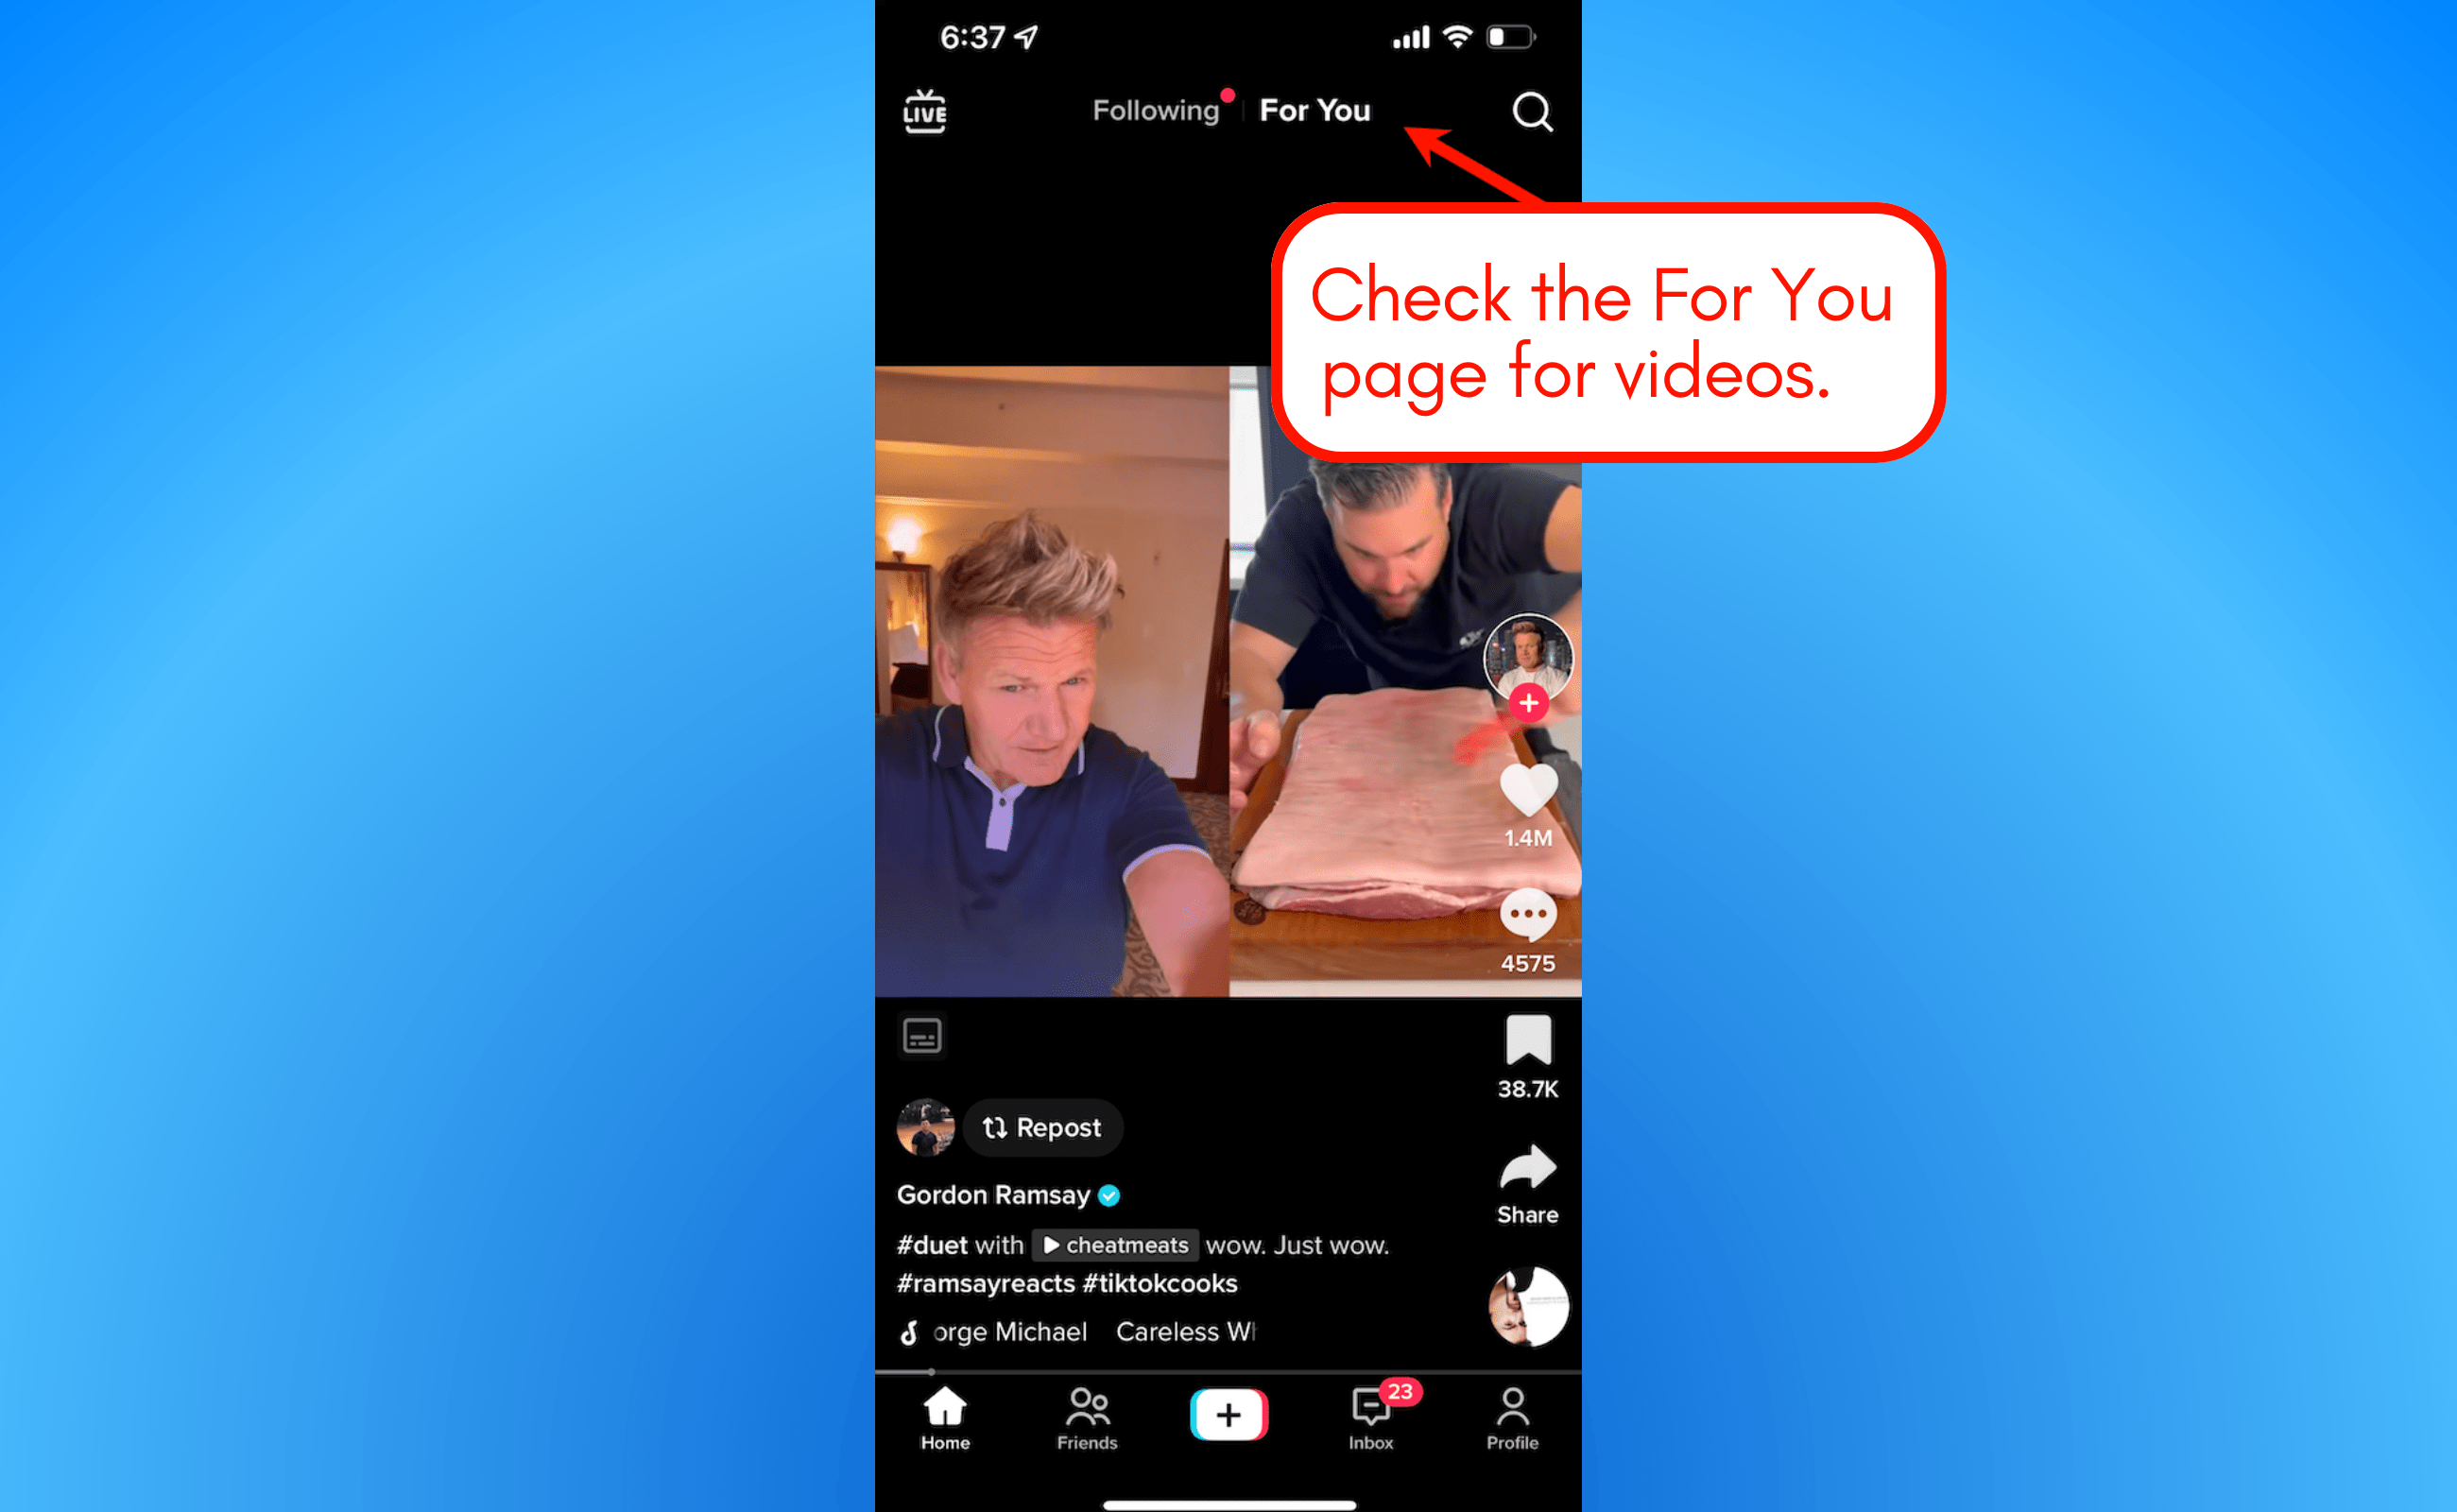 Screenshot of TikTok's For You page for videos.